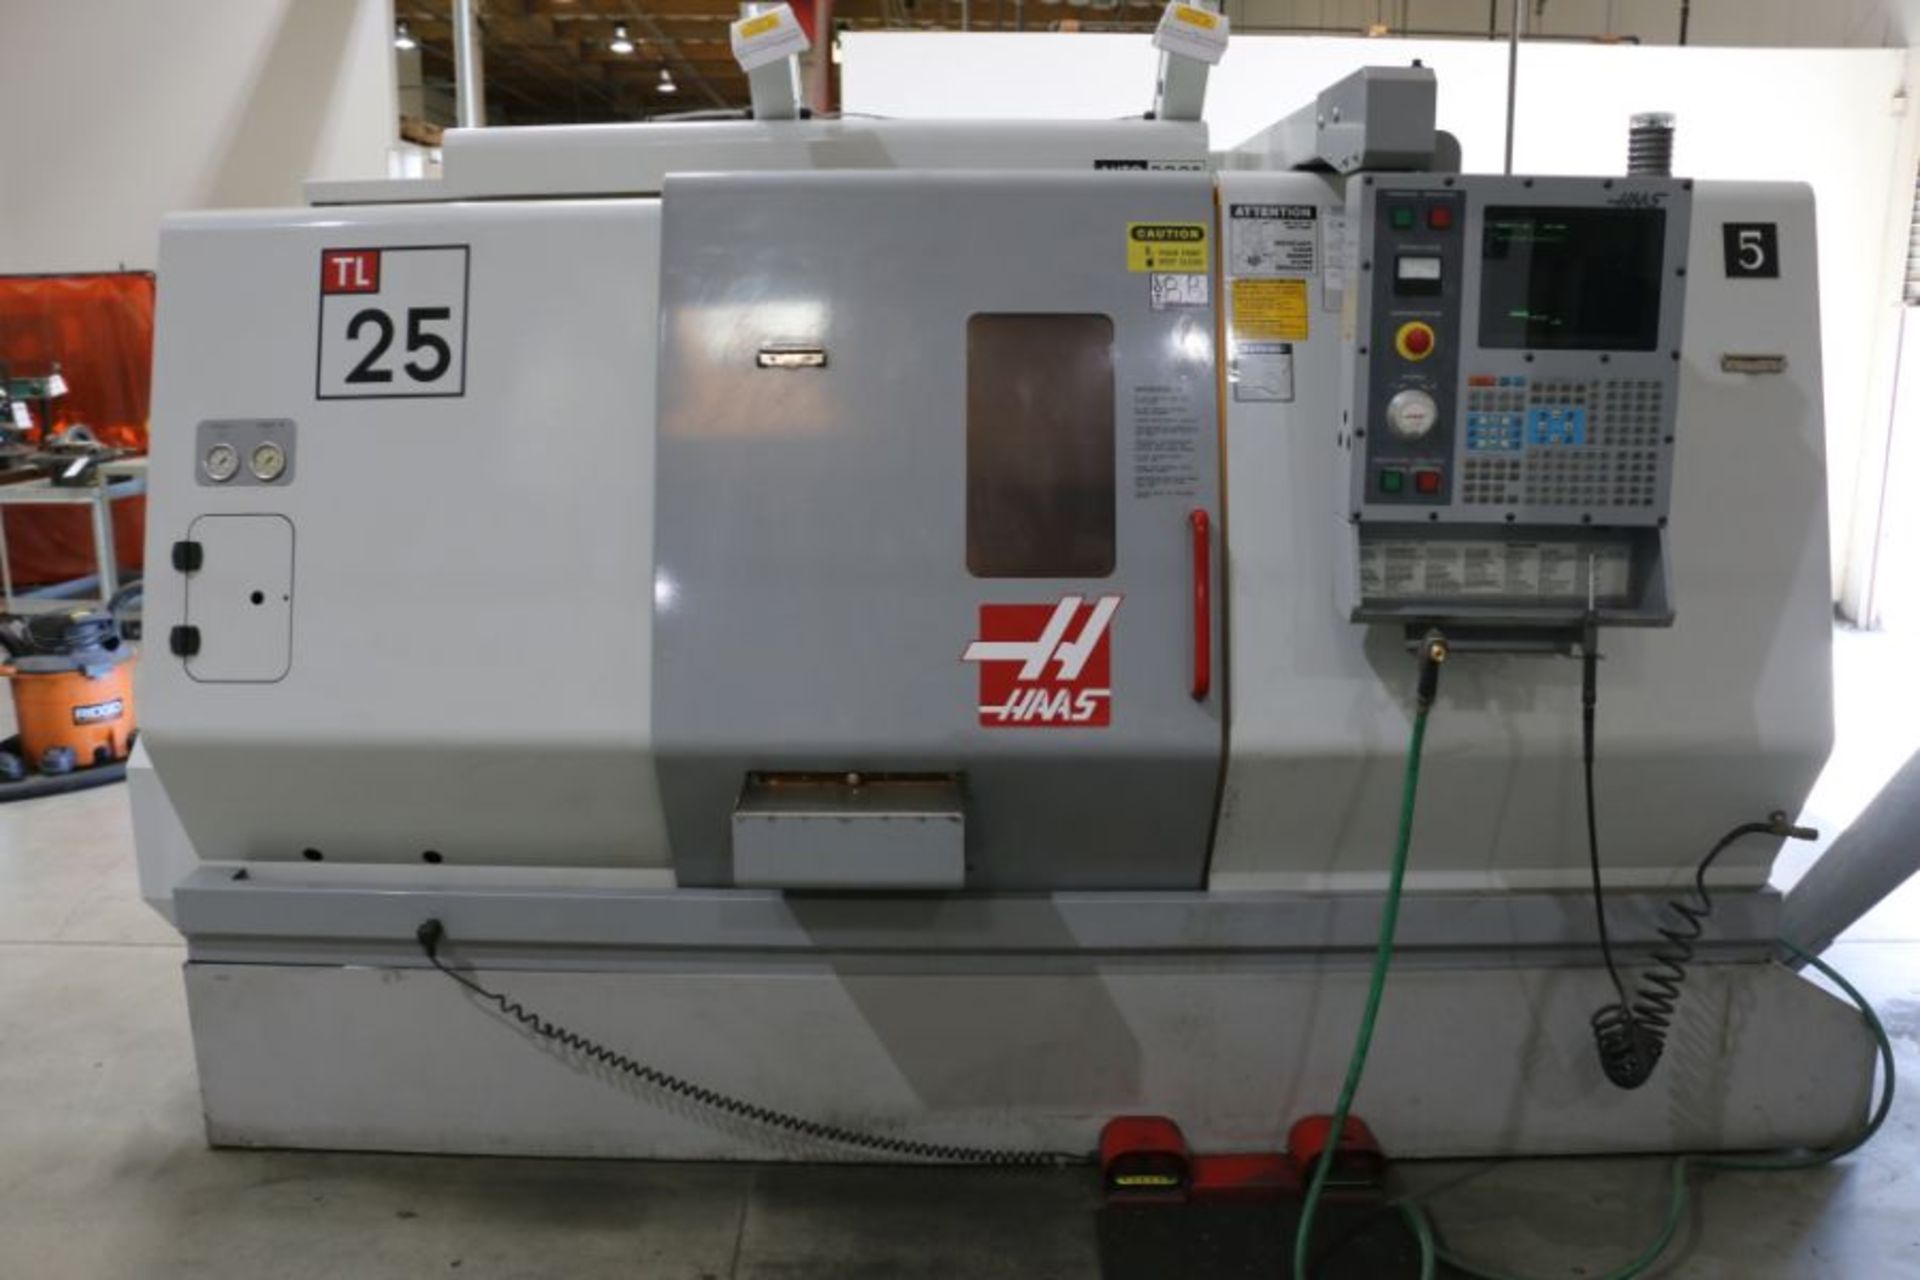 Haas TL-25 CNC Lathe, Collet Nose, 12 Position Turret, s/n 65420, New 2002